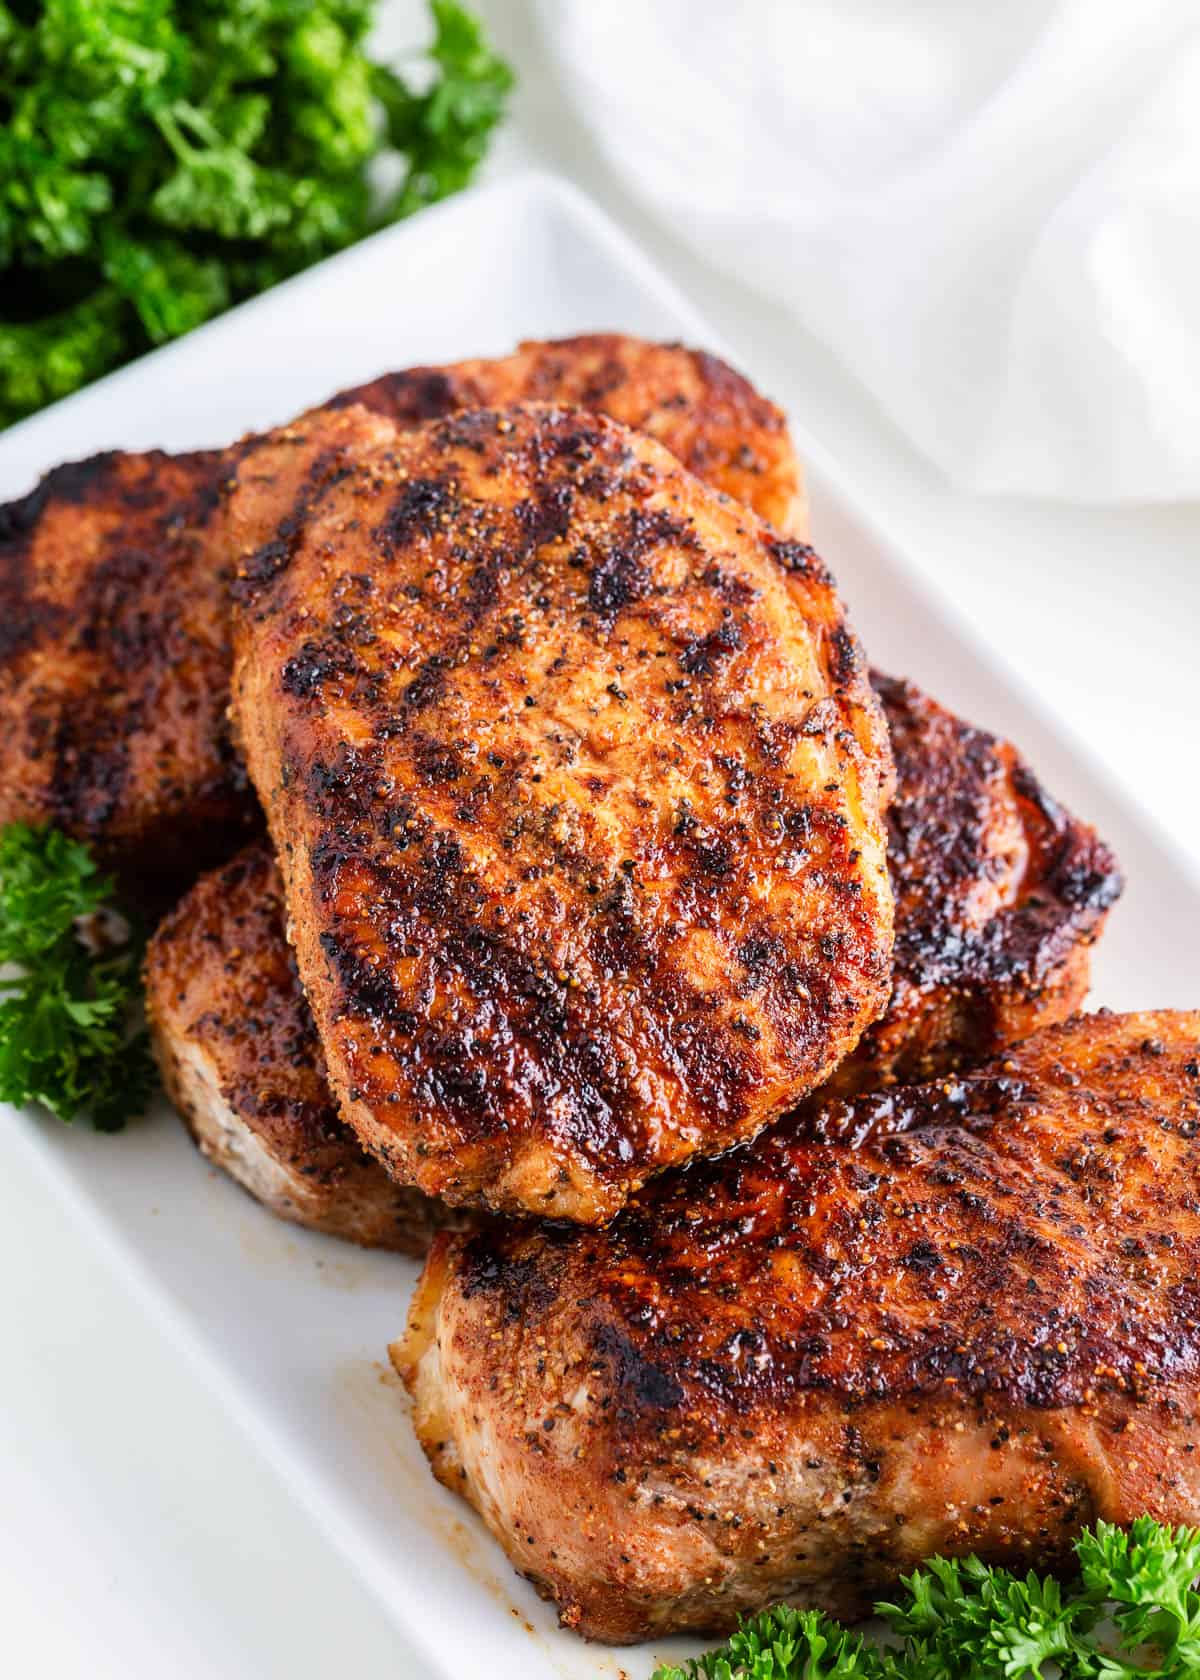 Grilled pork chops on a white plate with curly parsley.